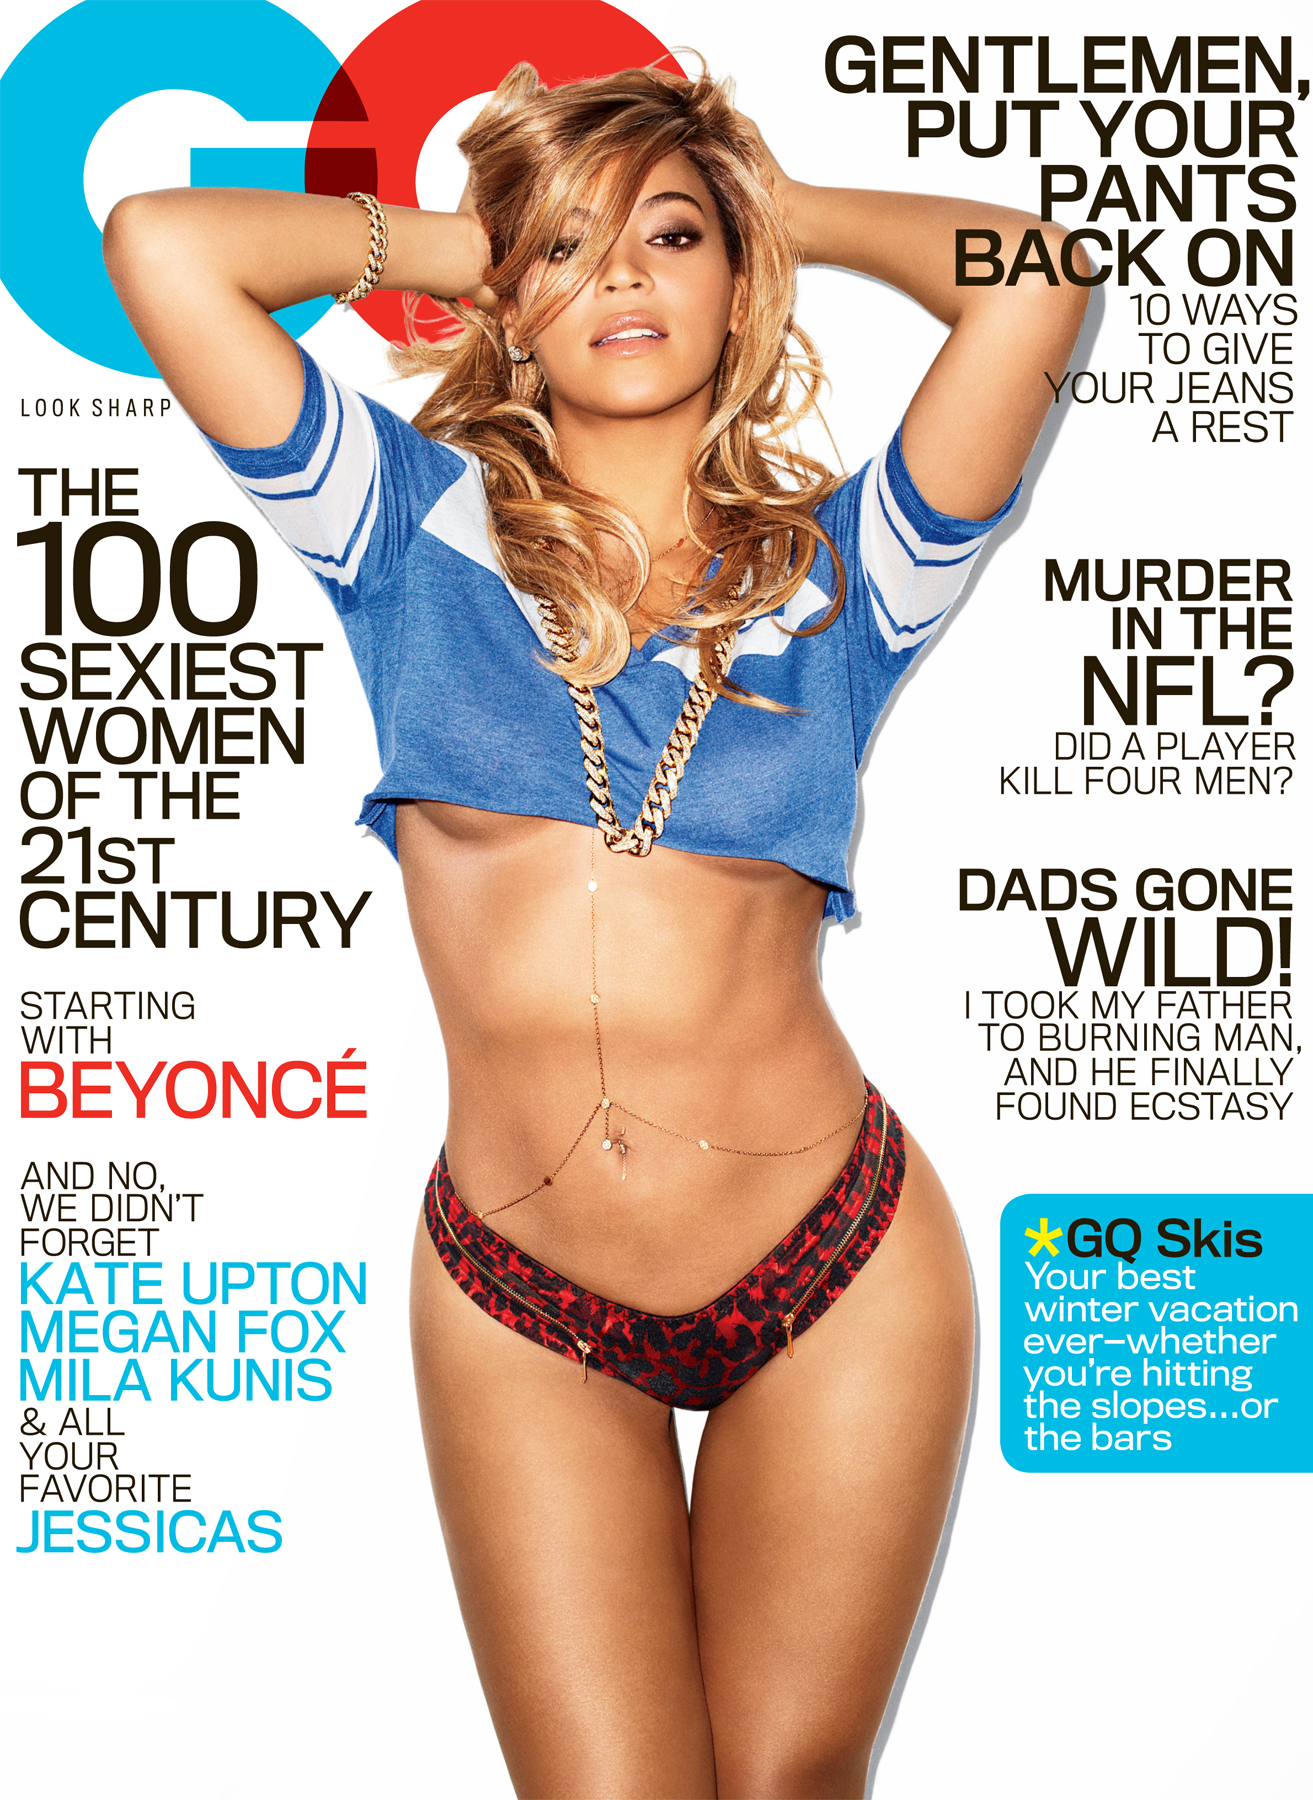 Beyoncé Covers Gqs The 100 Sexiest Women Of The 21st Century Issue Home Of Hip Hop Videos 